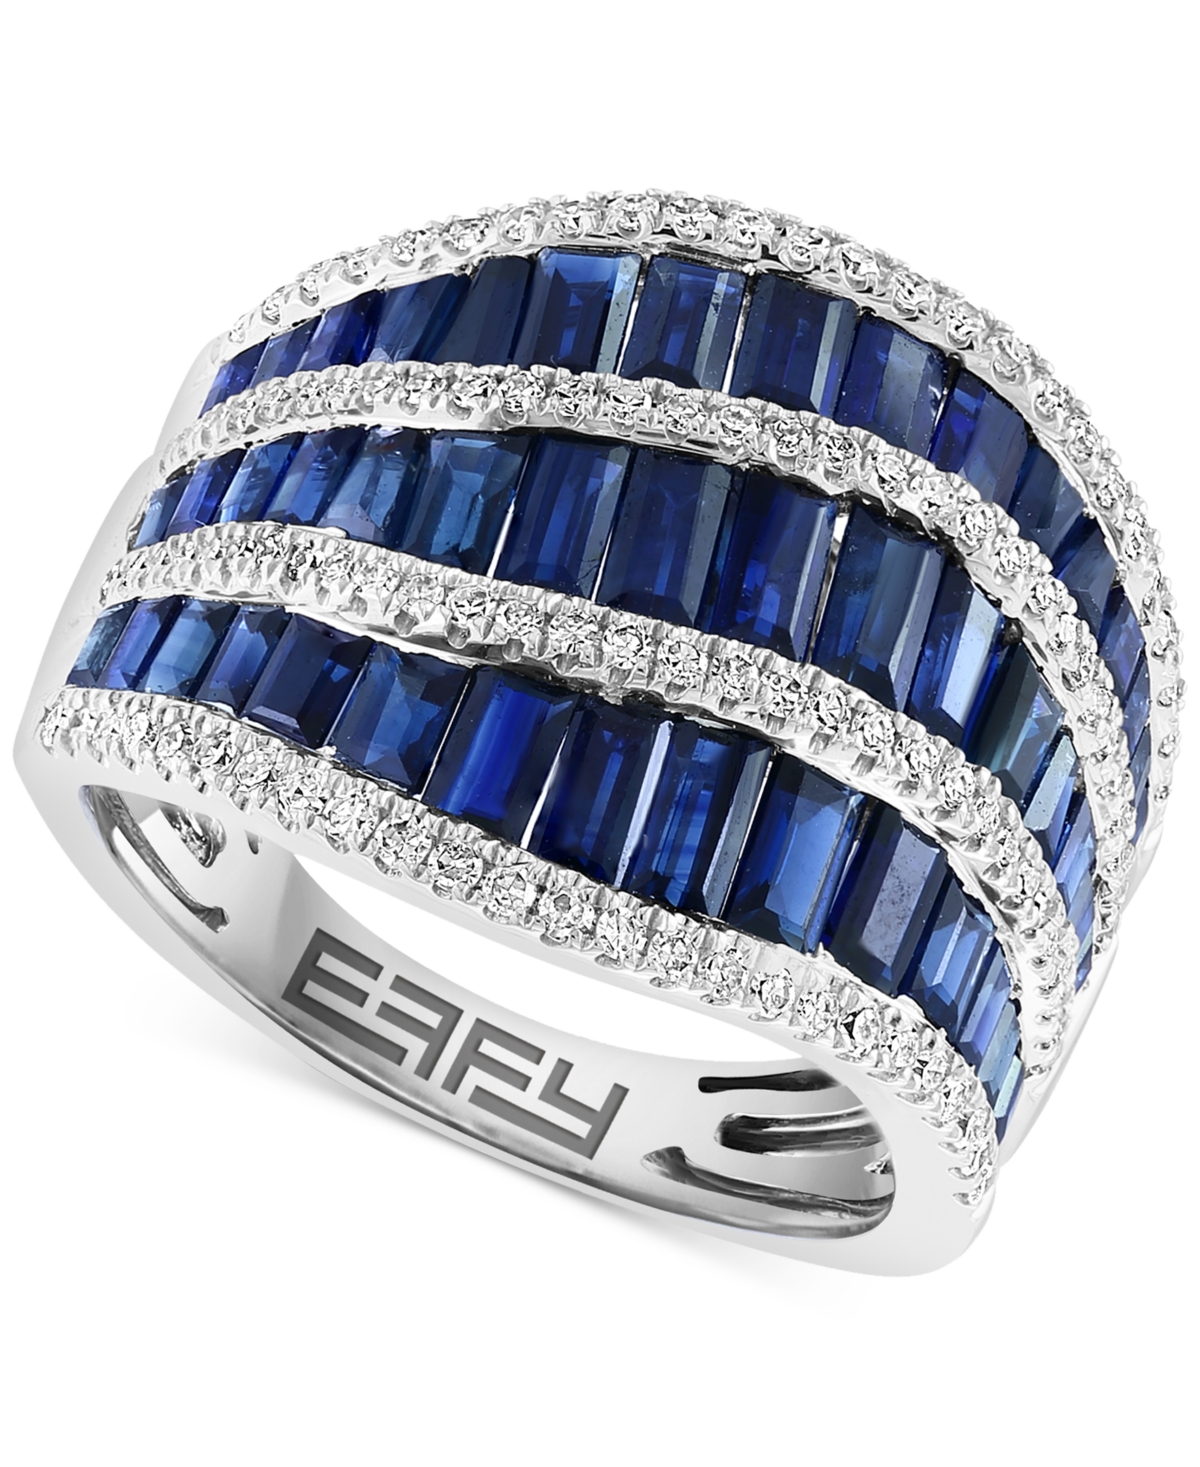 Effy Sapphire (4-3/4 ct. t.w.) & Diamond (3/8 ct. t.w.) Baguette Statement Ring in 14k White Gold - White Gold